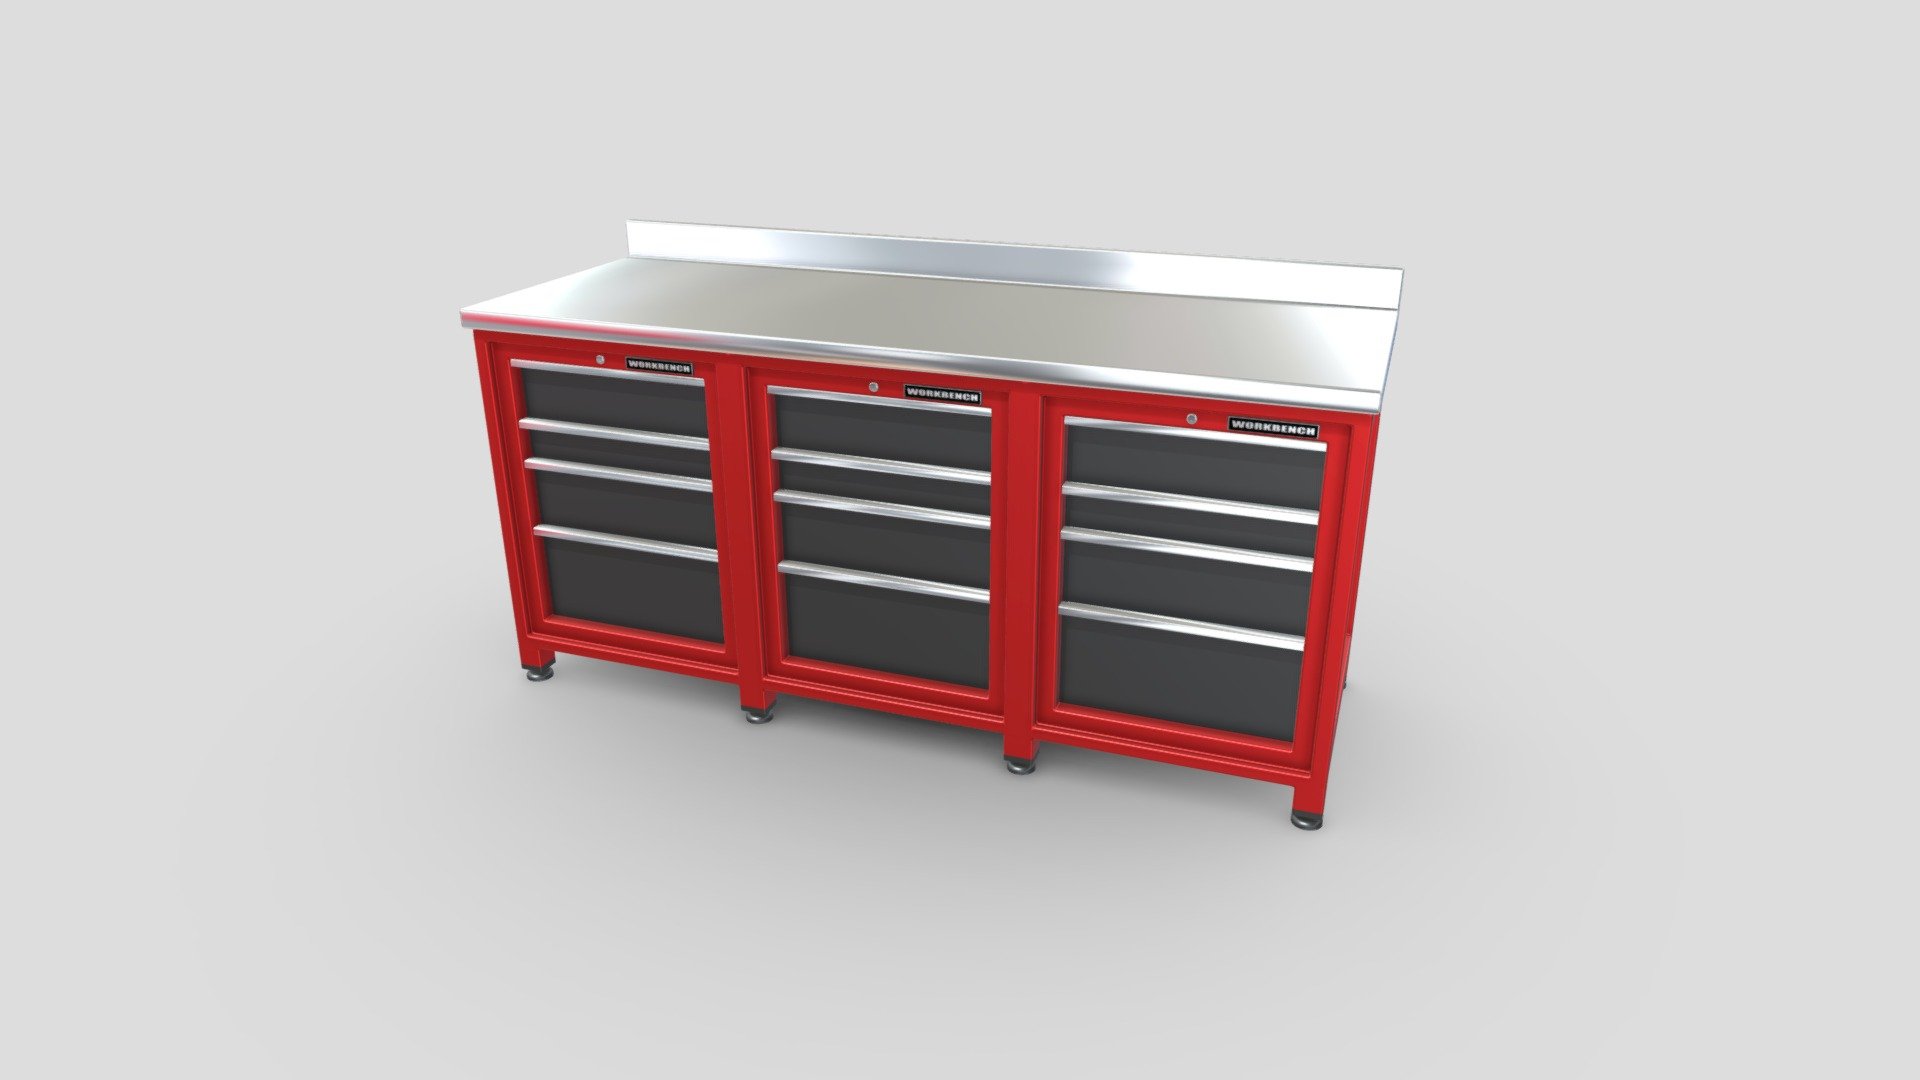 Workbench 3D model that I made using Blender. The mesh of this model is combined into one object, but certain parts of the mesh can be separated. The drawers can be moved out of the body of the model allowing them to slide out. Some key features of the model are the custom made “WORKBENCH” label as well as the keyhole found on each third of the model.

Features:


Includes GLTF file type instructions
Model uses the metalness workflow and 4K PBR textures in PNG format
Model has been manually UV unwrapped
Blend file includes pre-applied textures as well as camera and lighting setups
Lighting provided by included HDRi map downloaded from HDRi Haven
Model has been exported in 4 file formats (FBX, OBJ, GLTF/GLB, DAE/Collada)

Included Textures:


AO, Diffuse, Roughness, Gloss, Metallic
UVLayout

The source file that is uploaded is for demonstration use and is uploaded in FBX format. In the additional file you will find all model exports and the textures that go along with them 3d model